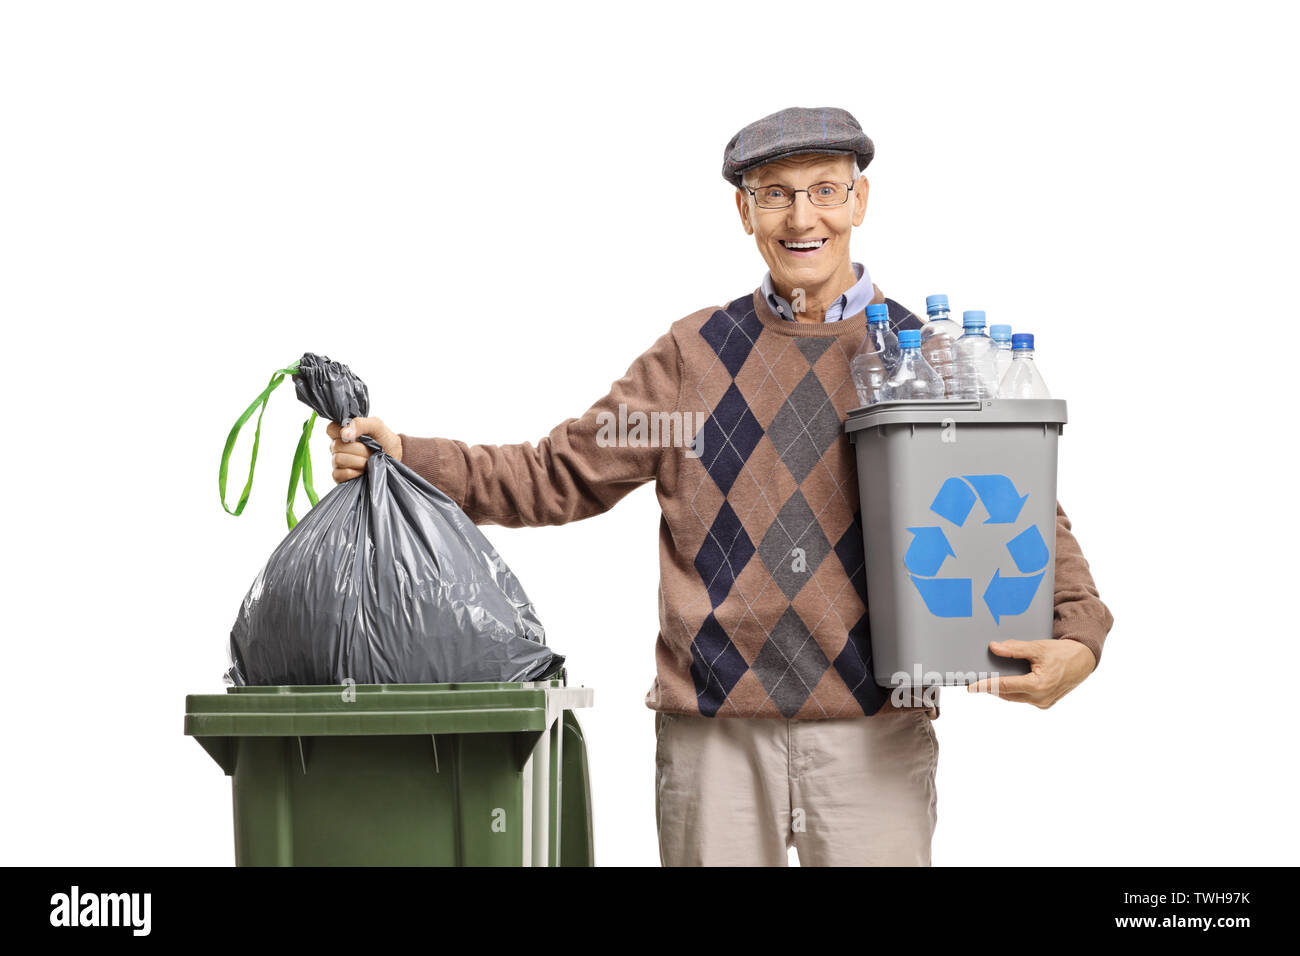 https://c8.alamy.com/comp/TWH97K/elderly-man-with-a-recycling-bin-throwing-a-garbage-bag-in-a-trash-can-isolated-on-white-background-TWH97K.jpg